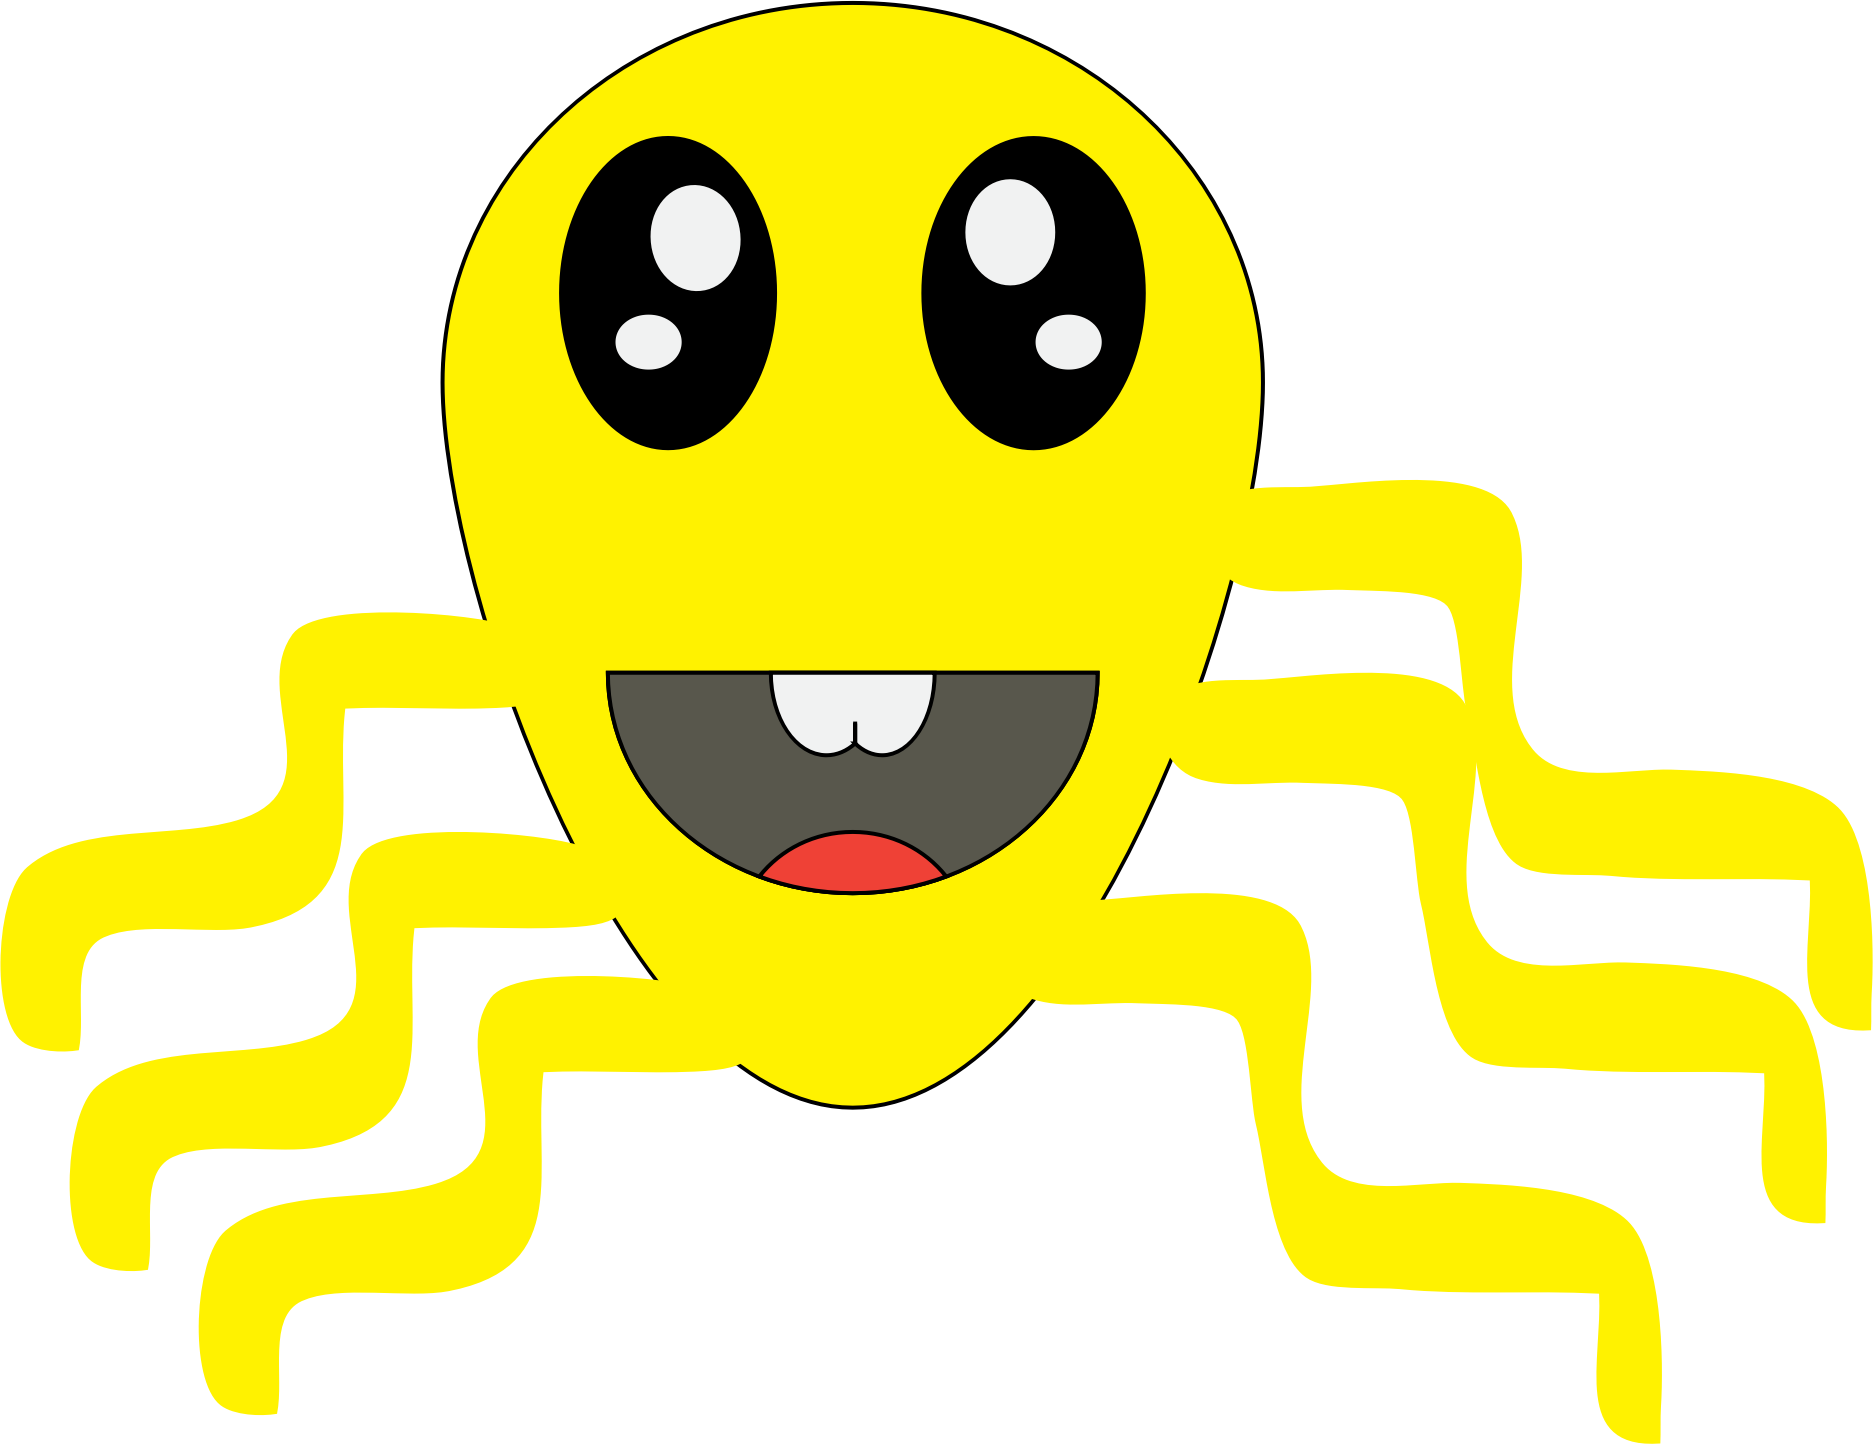 Big image png. Clipart octopus yellow